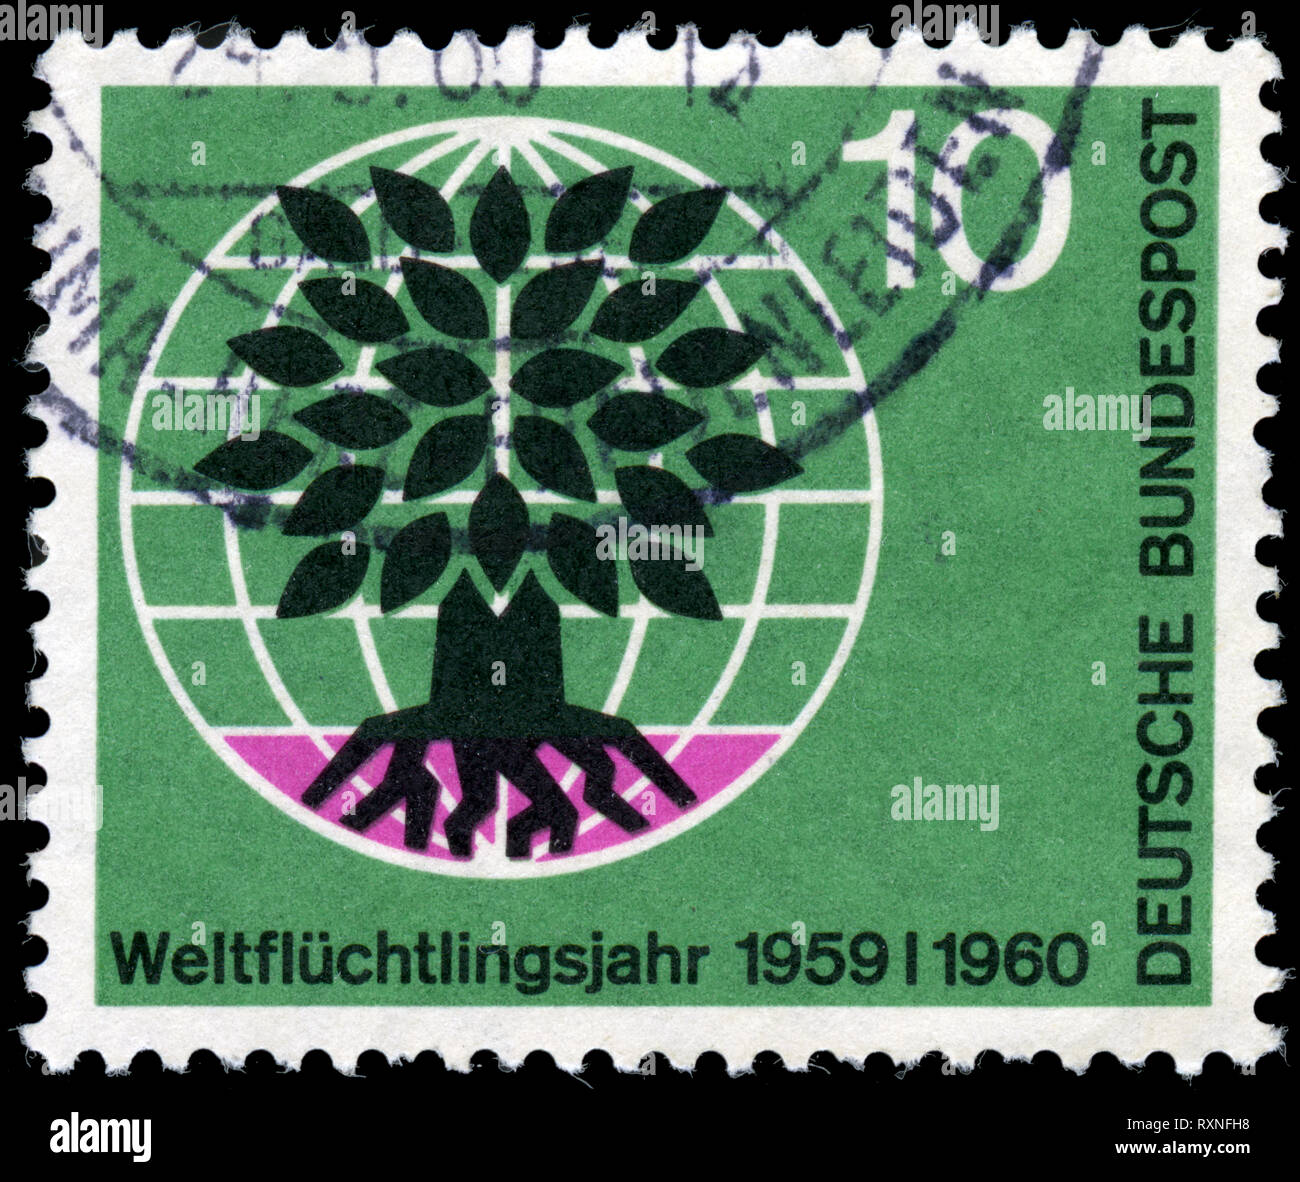 Postage stamp from the Federal Republic of Germany in the World Refugee Year 1959/60 series issued in 1960 Stock Photo